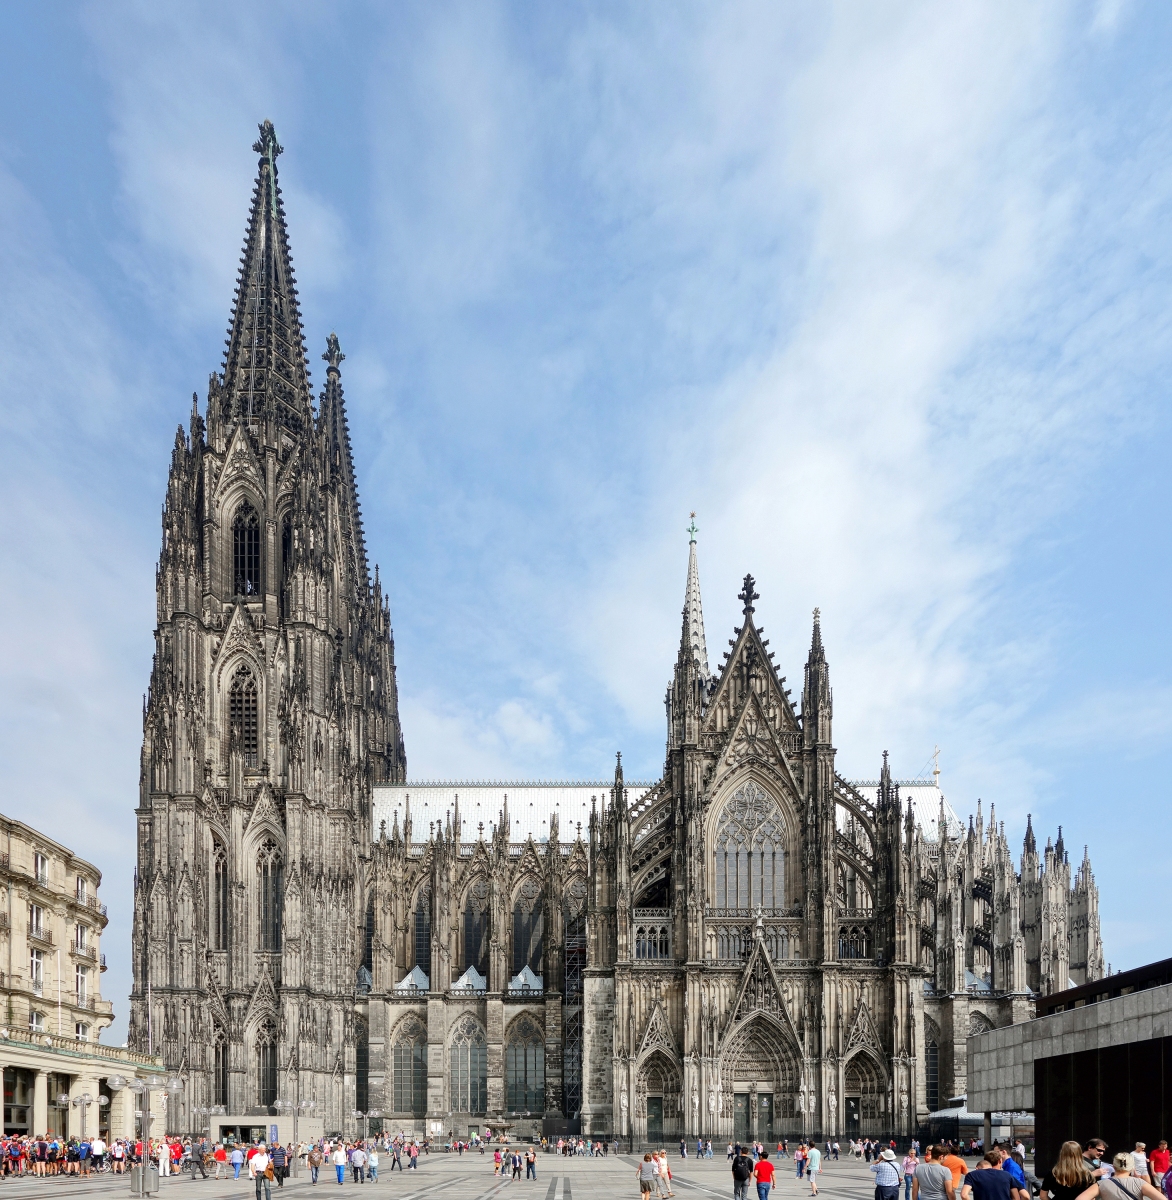 National monument of Germany - Cologne Cathedral